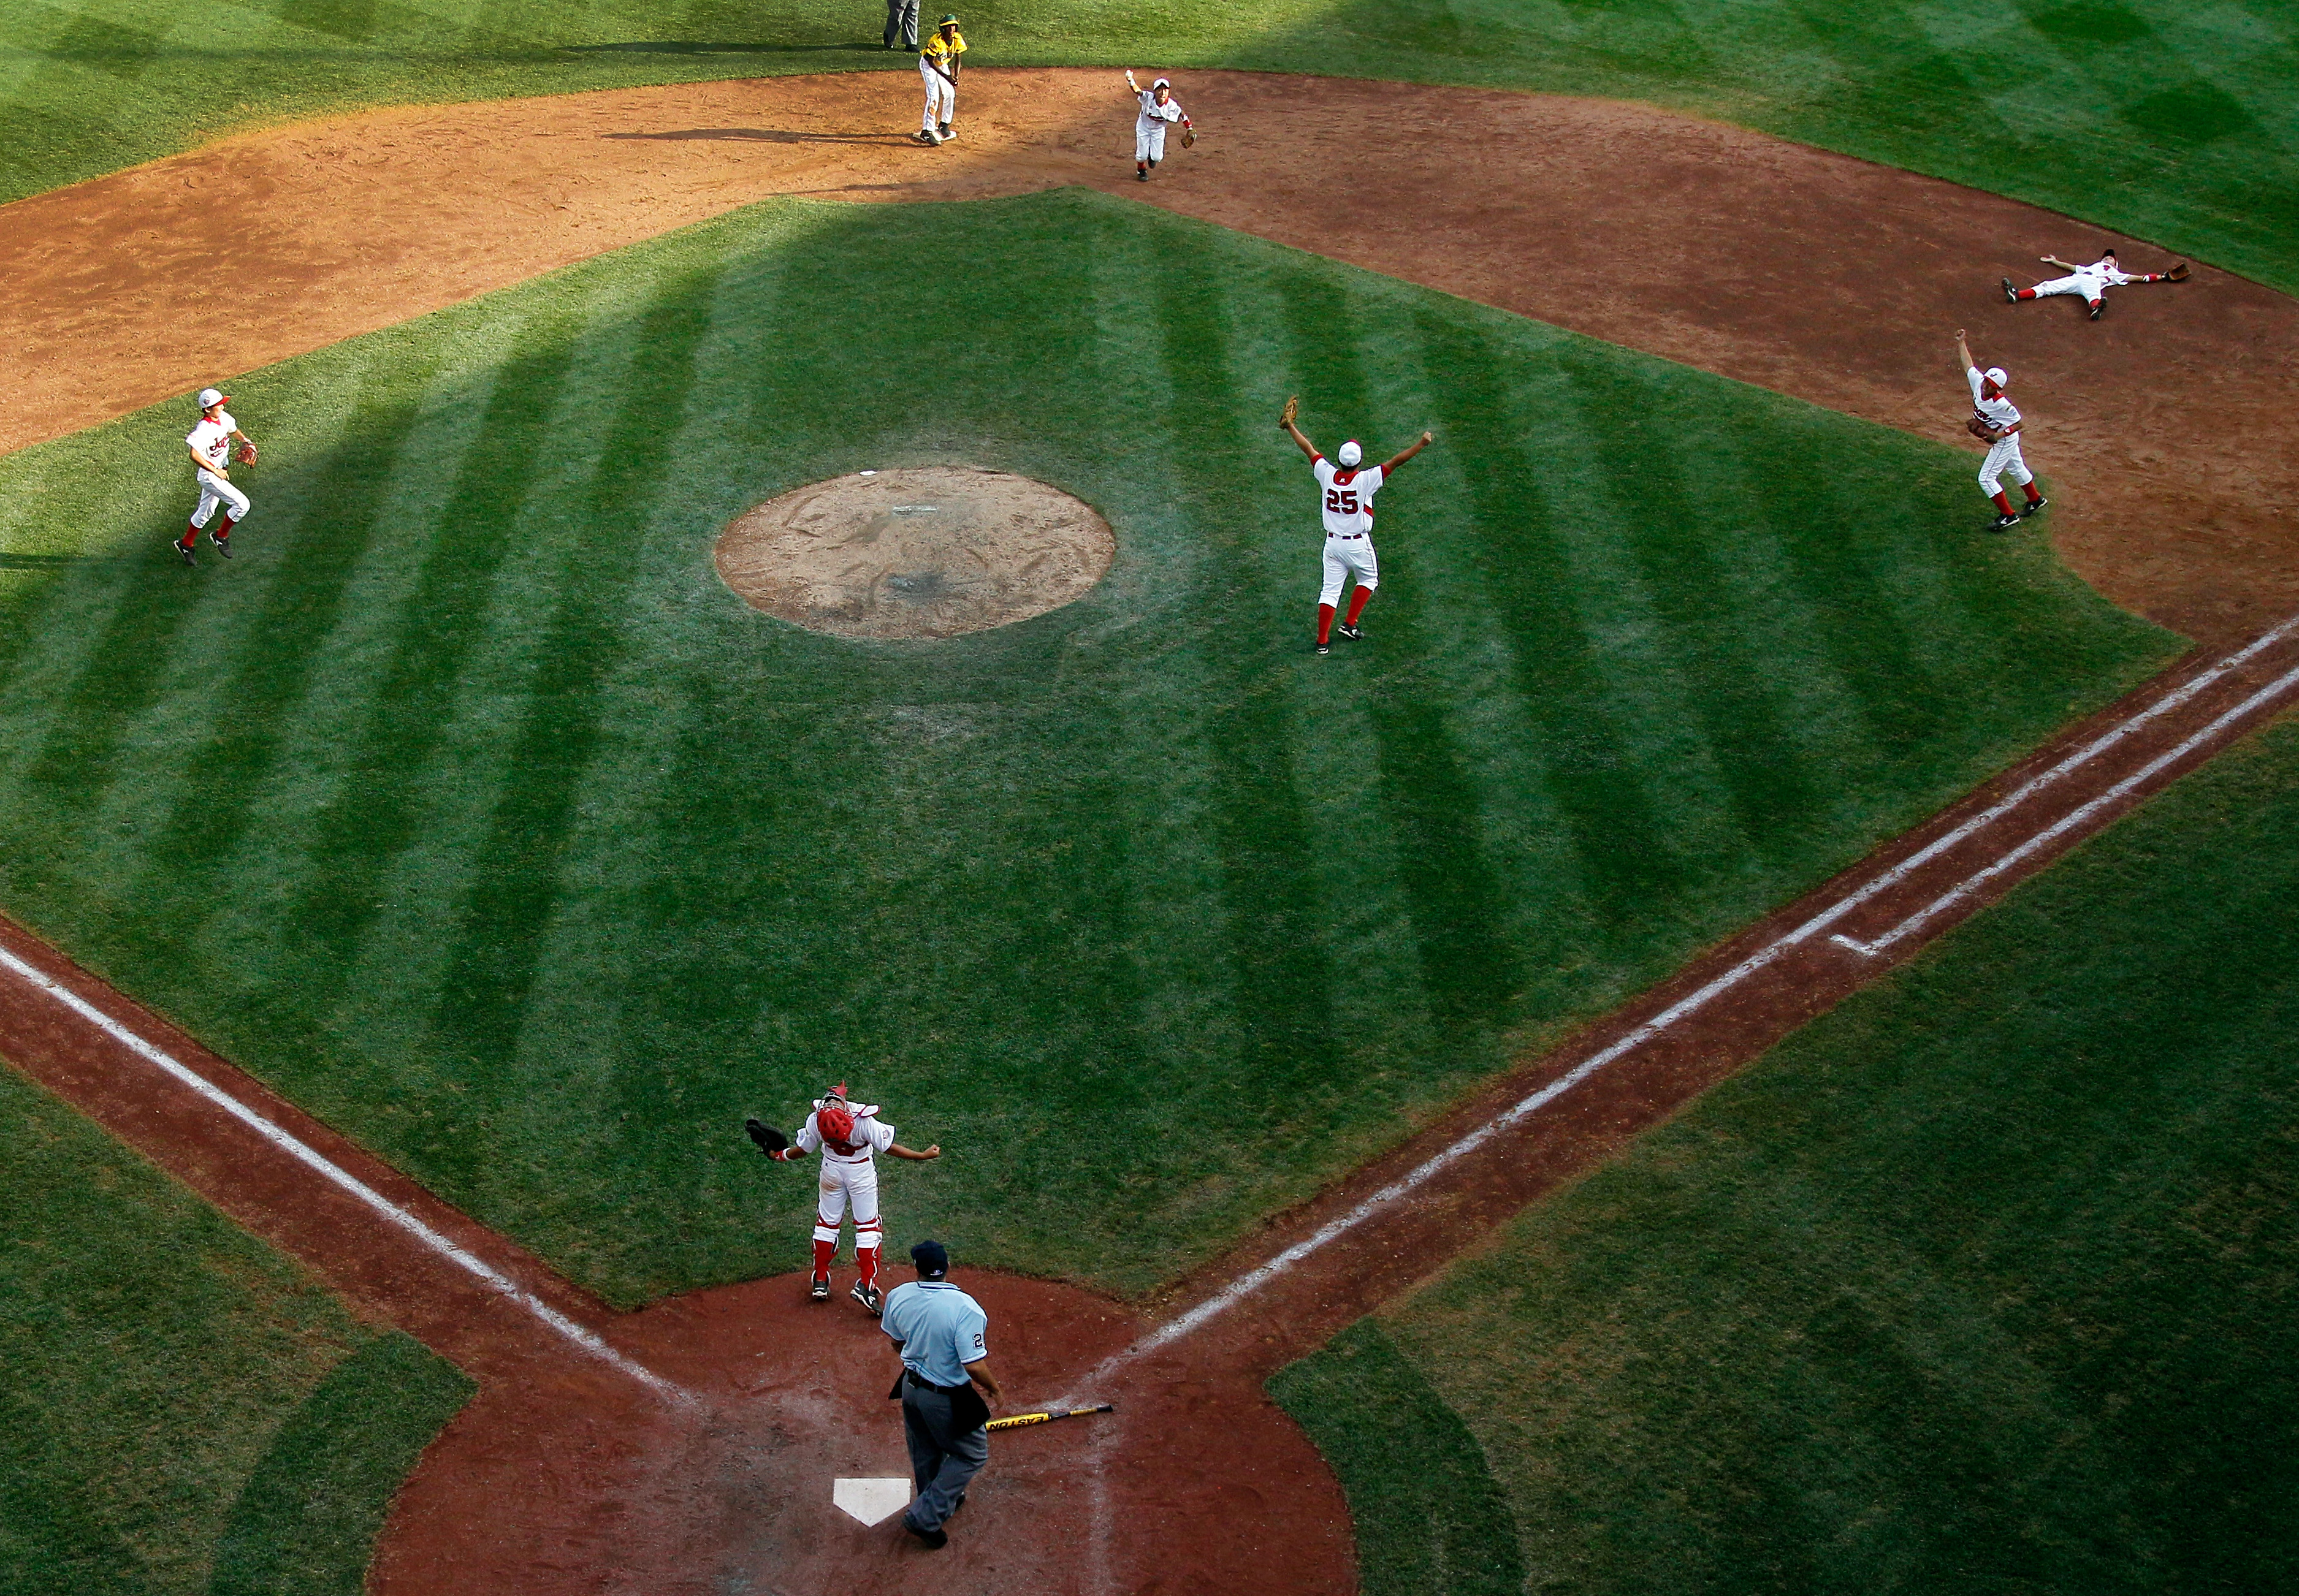 LLWS Southeast Regional Championship 2015 Time, Date, Channel